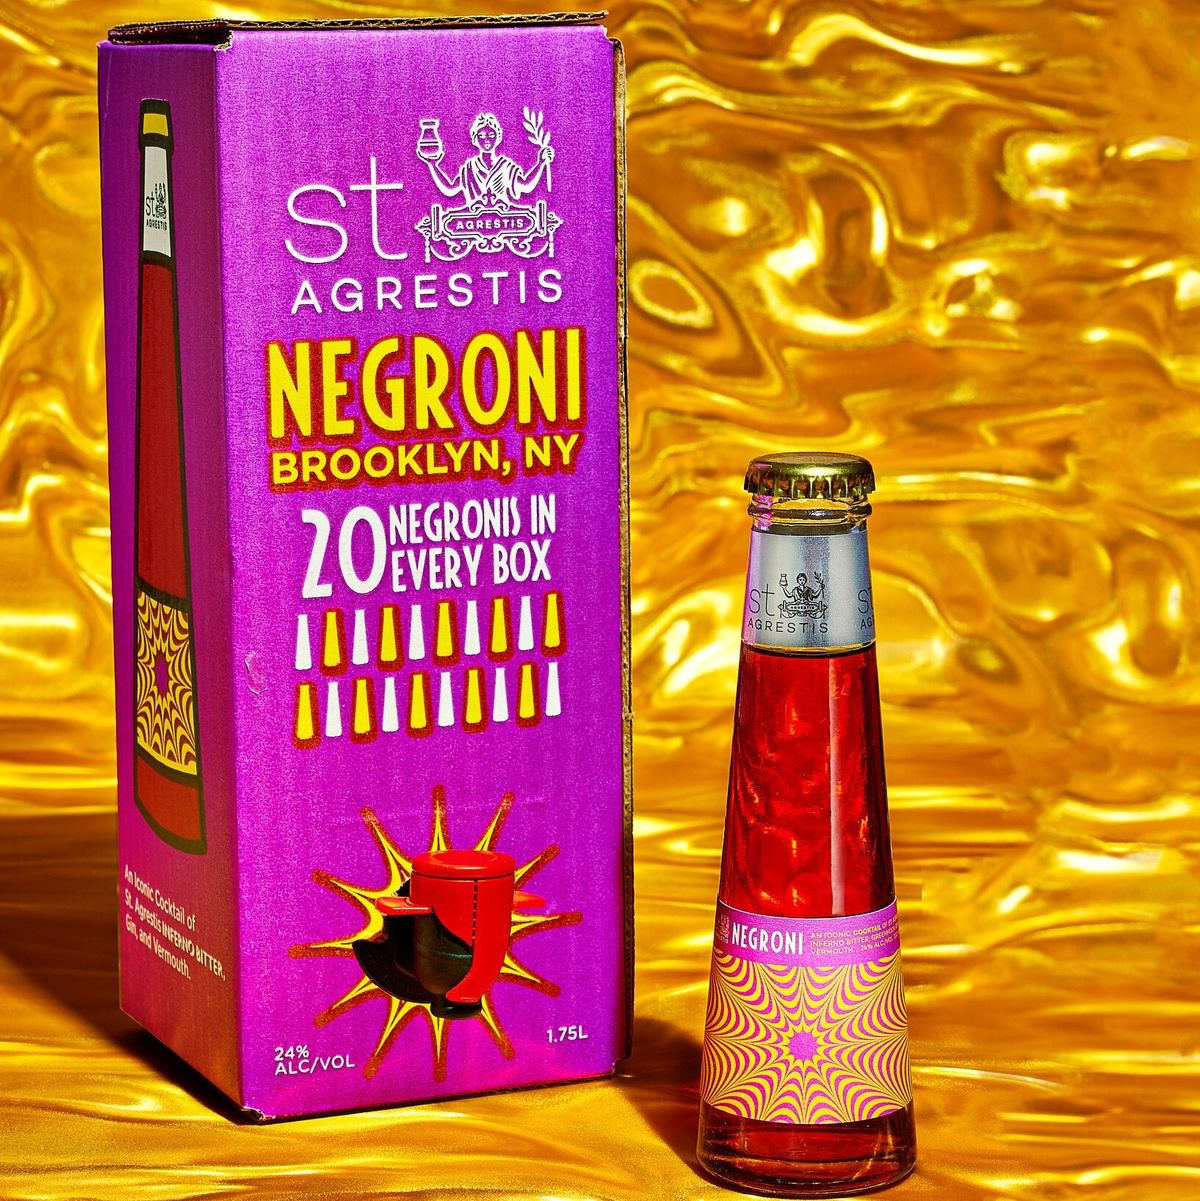 st agrestis negroni in a box